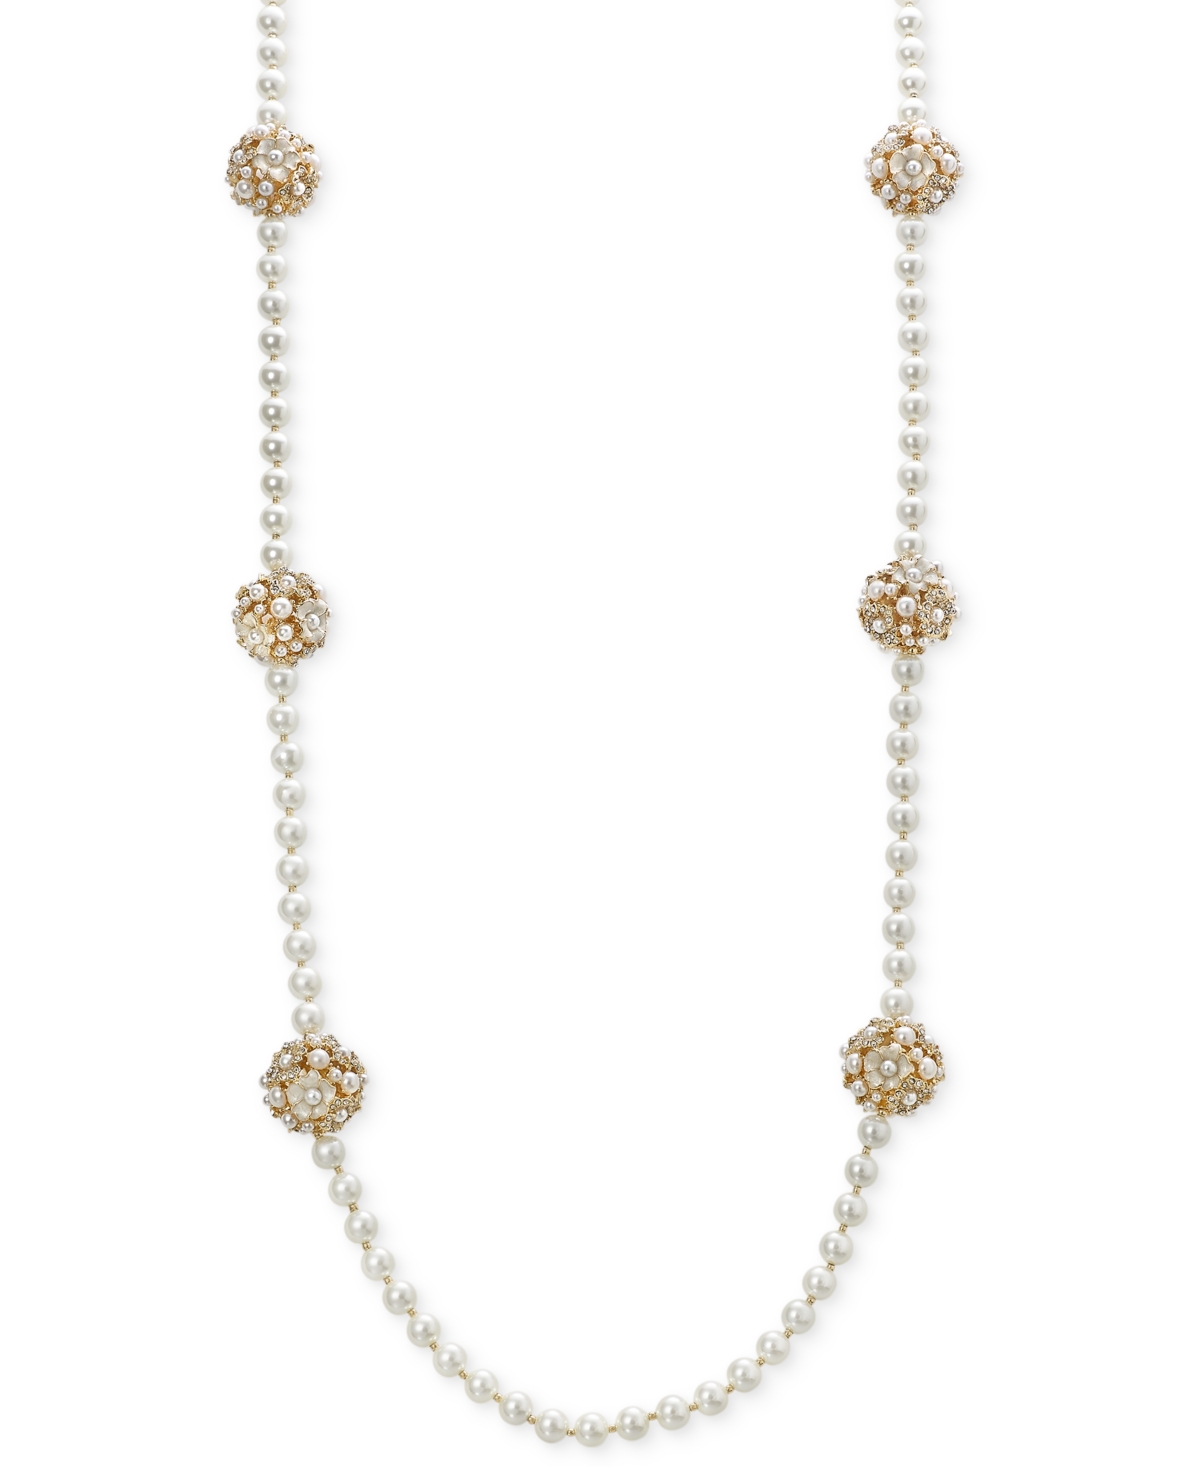 Gold-Tone Long Beaded Necklace, 42" + 2" extender, Created for Macy's - Gold